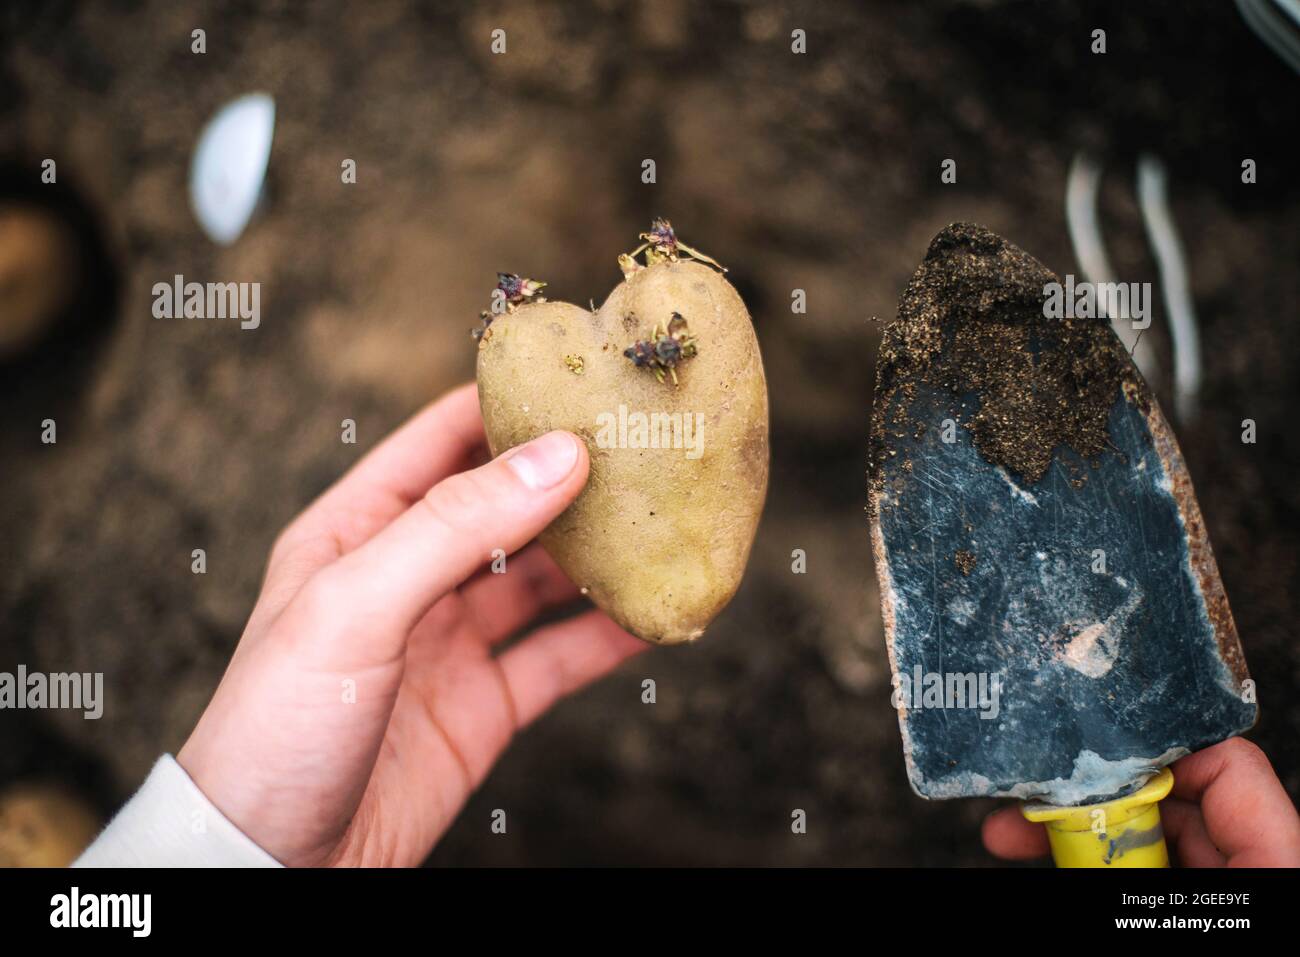 Woman planting potatoes in a home vegetable garden Stock Photo